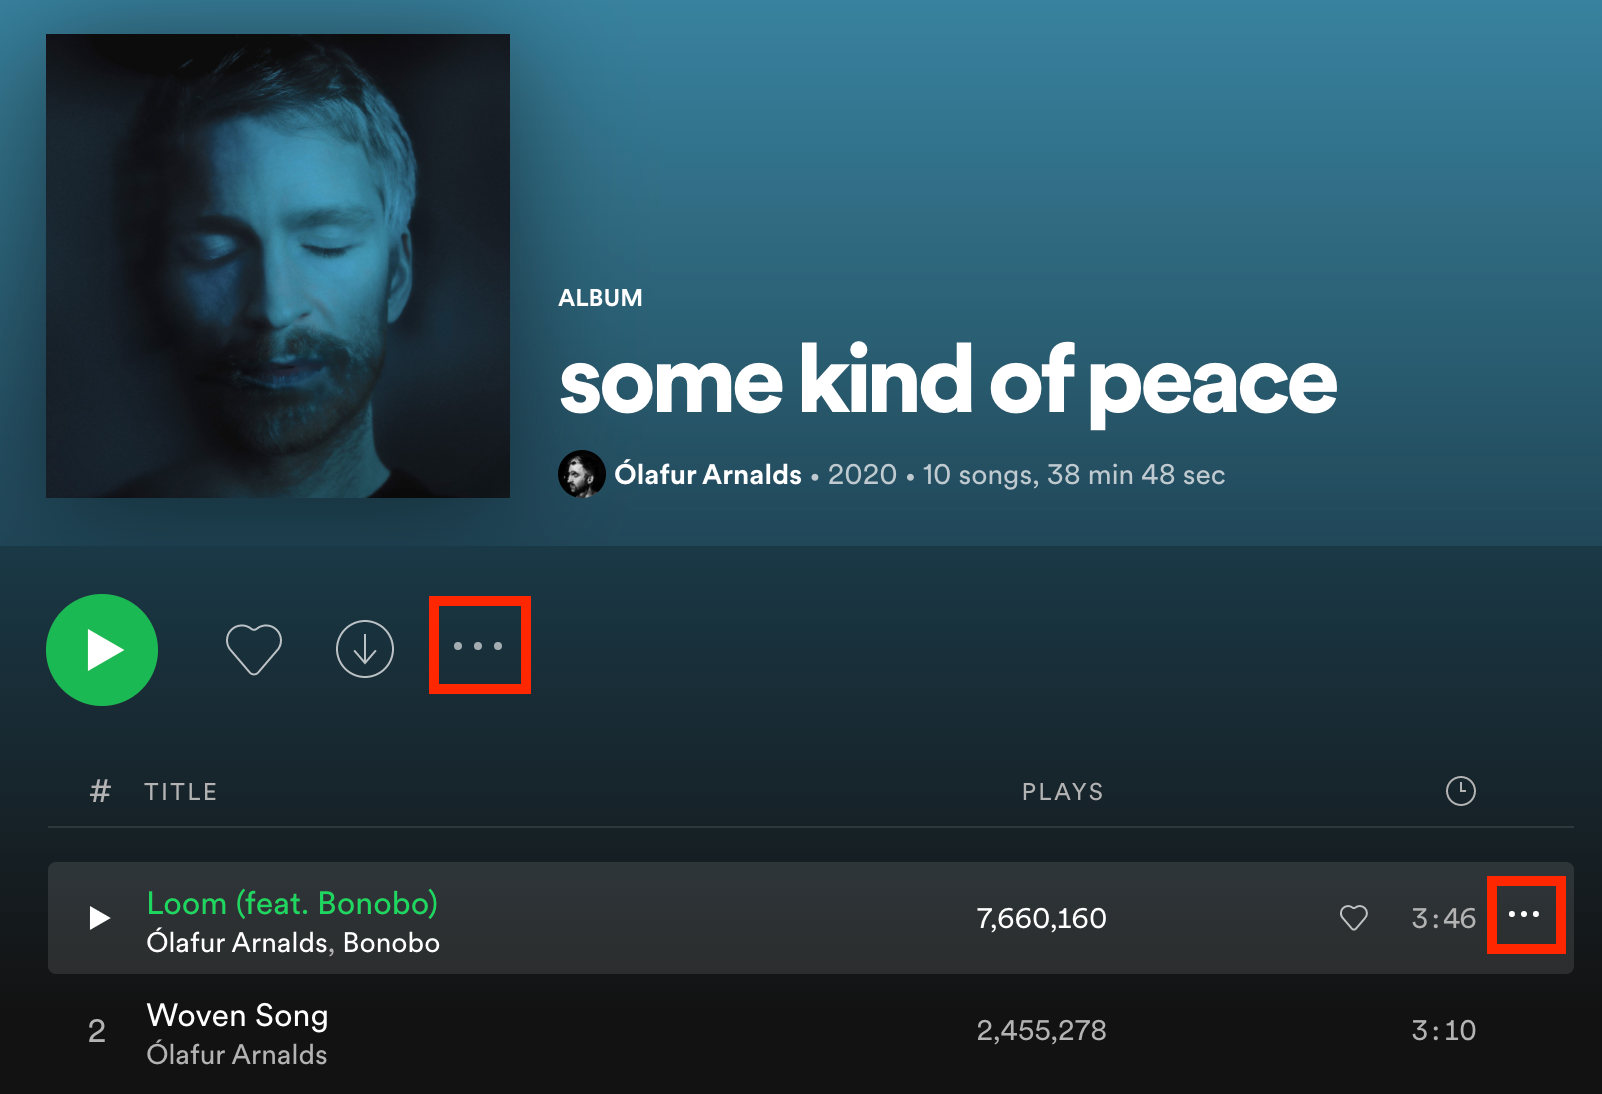 Selecting the horizontal three-dot icon next to a song, album, or playlist on Spotify